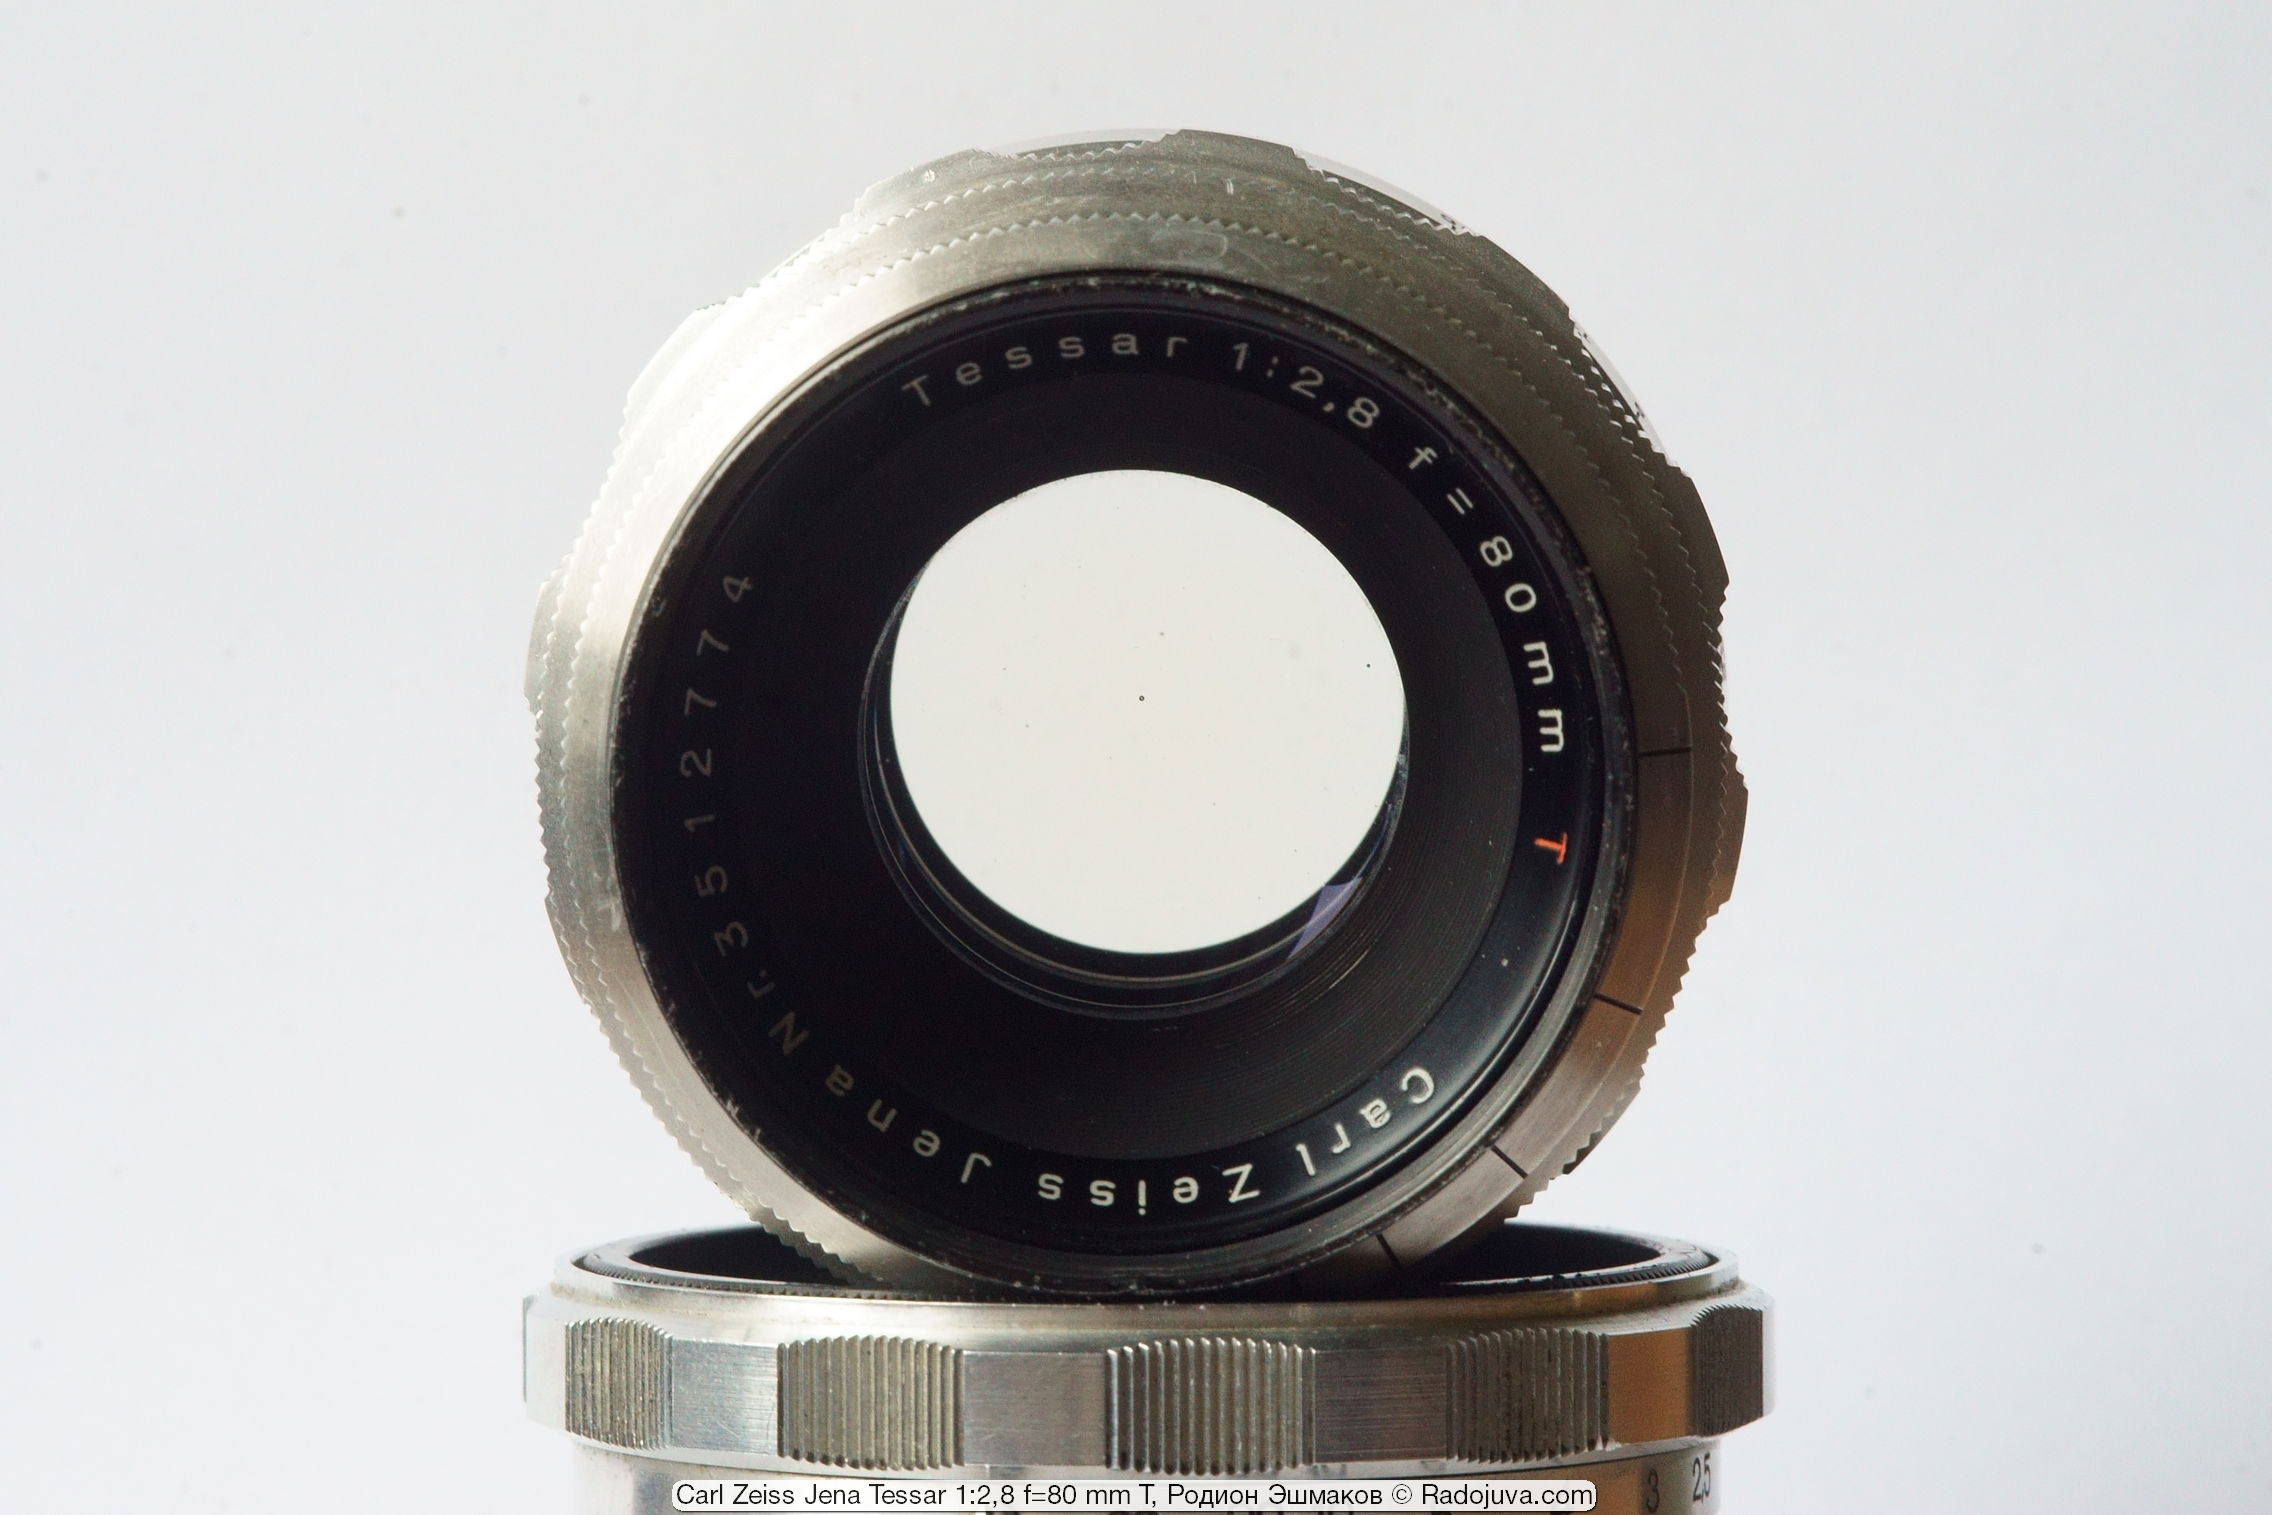 Tessar 80 / 2.8 lenses are noticeably yellow in transmission.